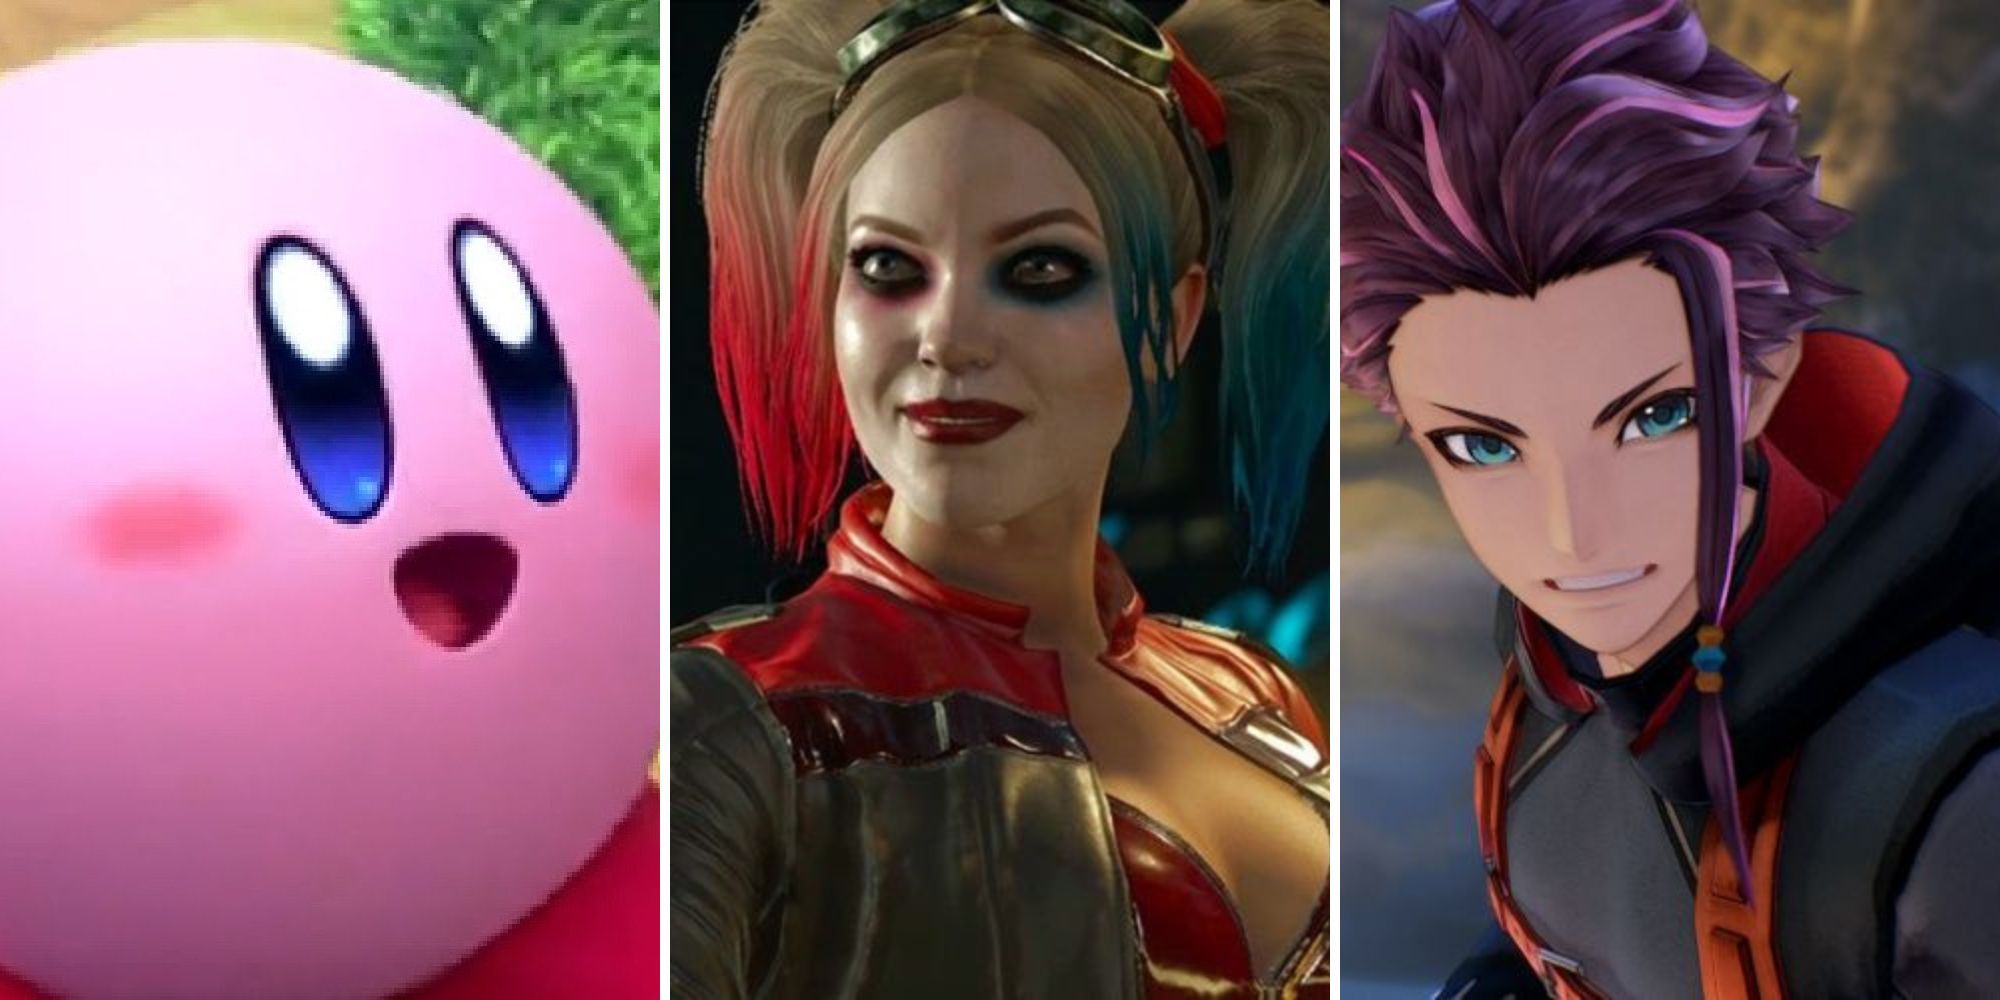 A grid of three characters from Kirby Forgotten Land, Injustice, and Tales of Arise